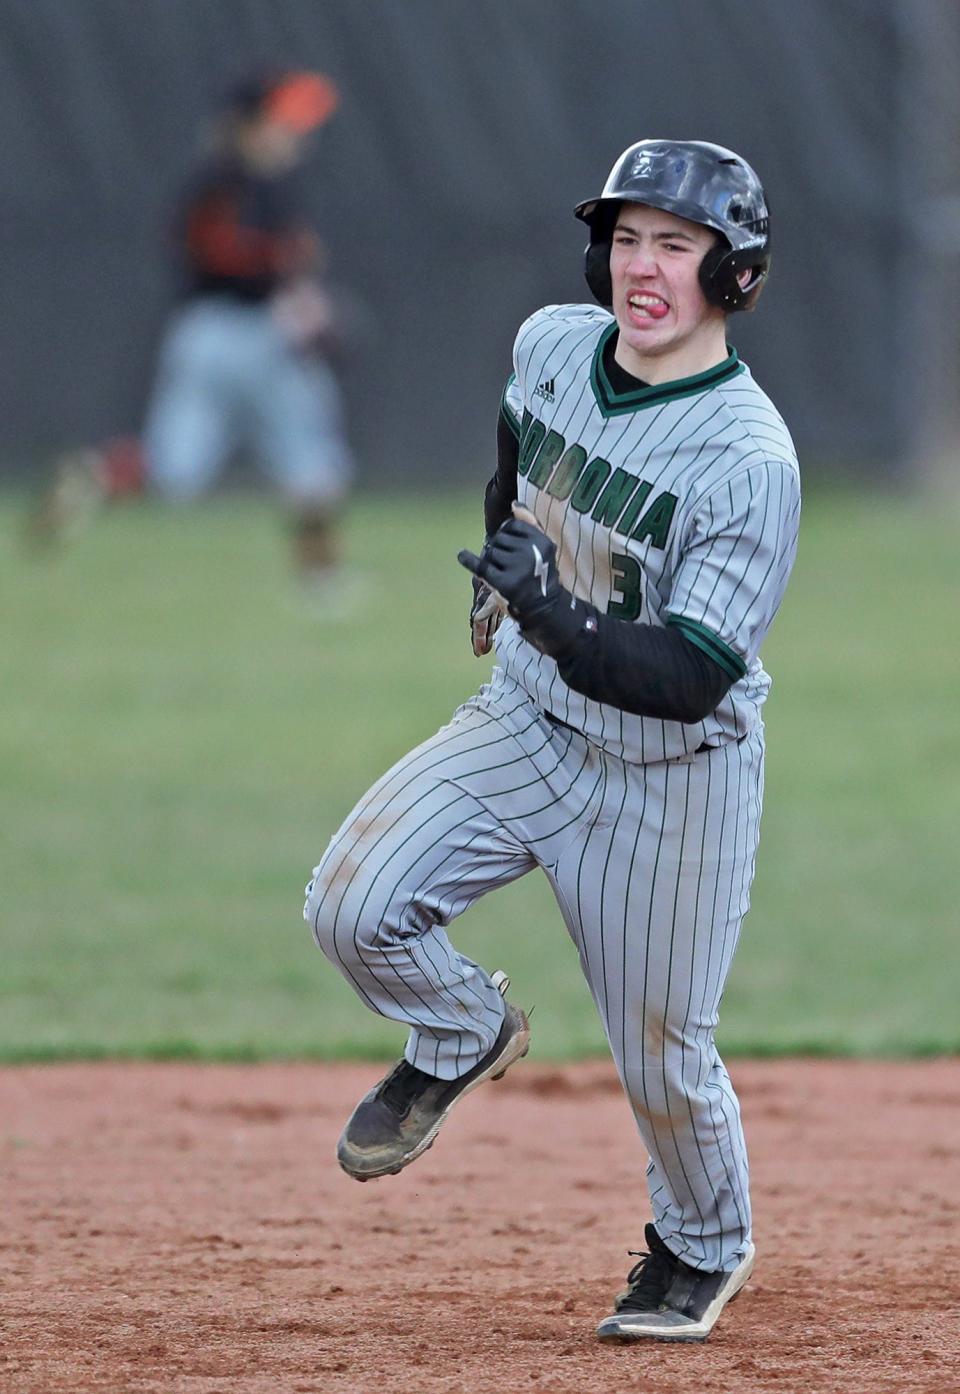 Nordonia baserunner Dash Lanzilotta sprints to third base on a shot by Hunter Grams during the third inning of a baseball game against the Green Bulldogs on Friday.